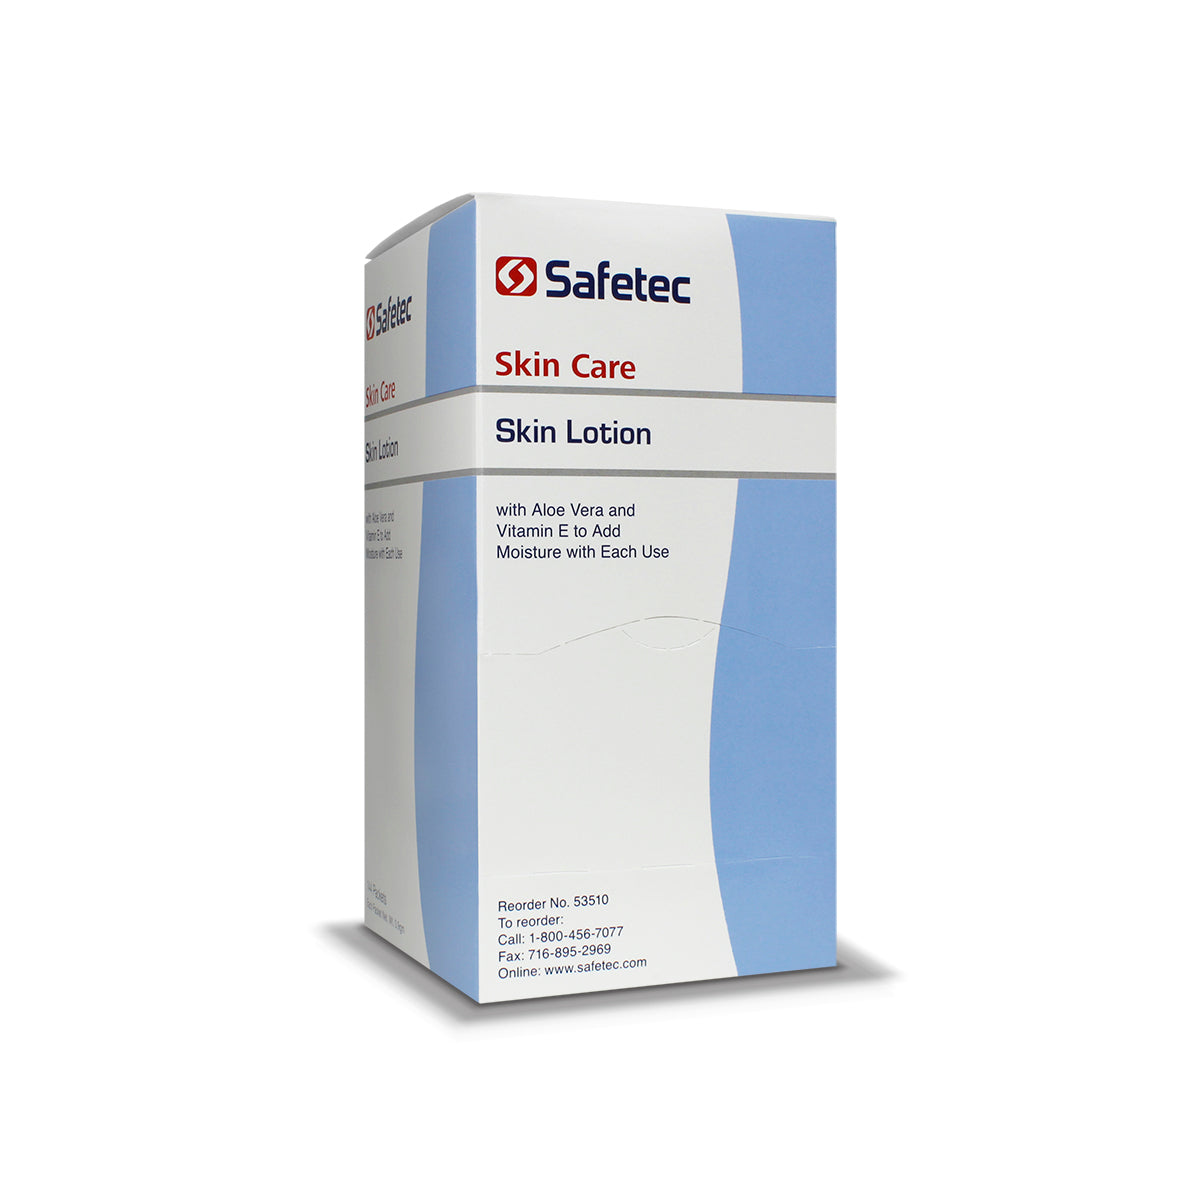 SafeTec - Skin Lotion - 0.9g Pouches - 144ct. Box data-zoom=